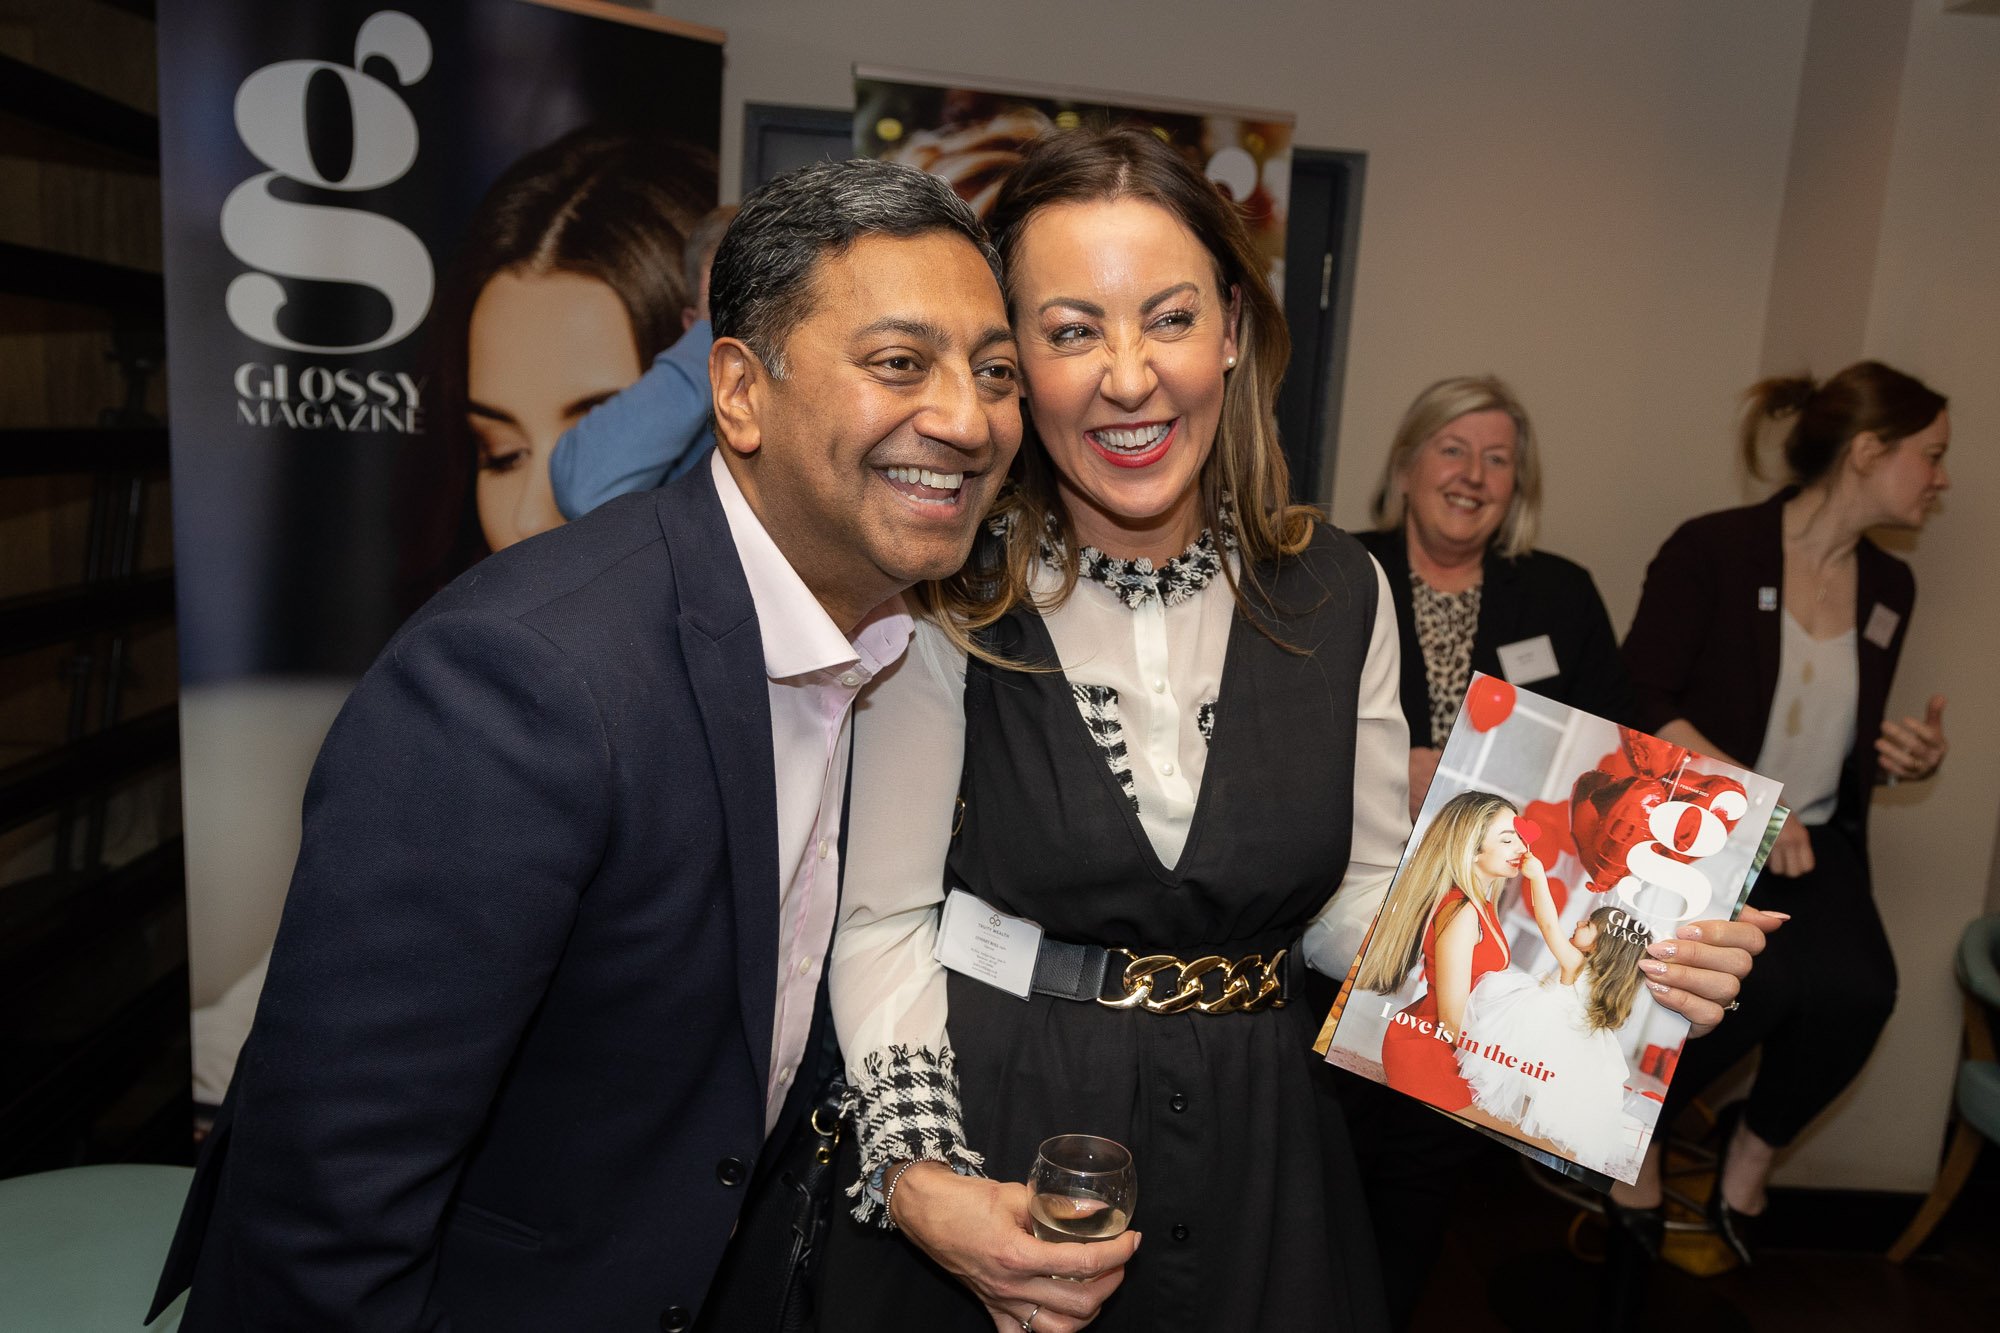 Business networking meeting hosted by Glossy Magazine at Piccolino Restaurant Hale Manchester-117.jpg